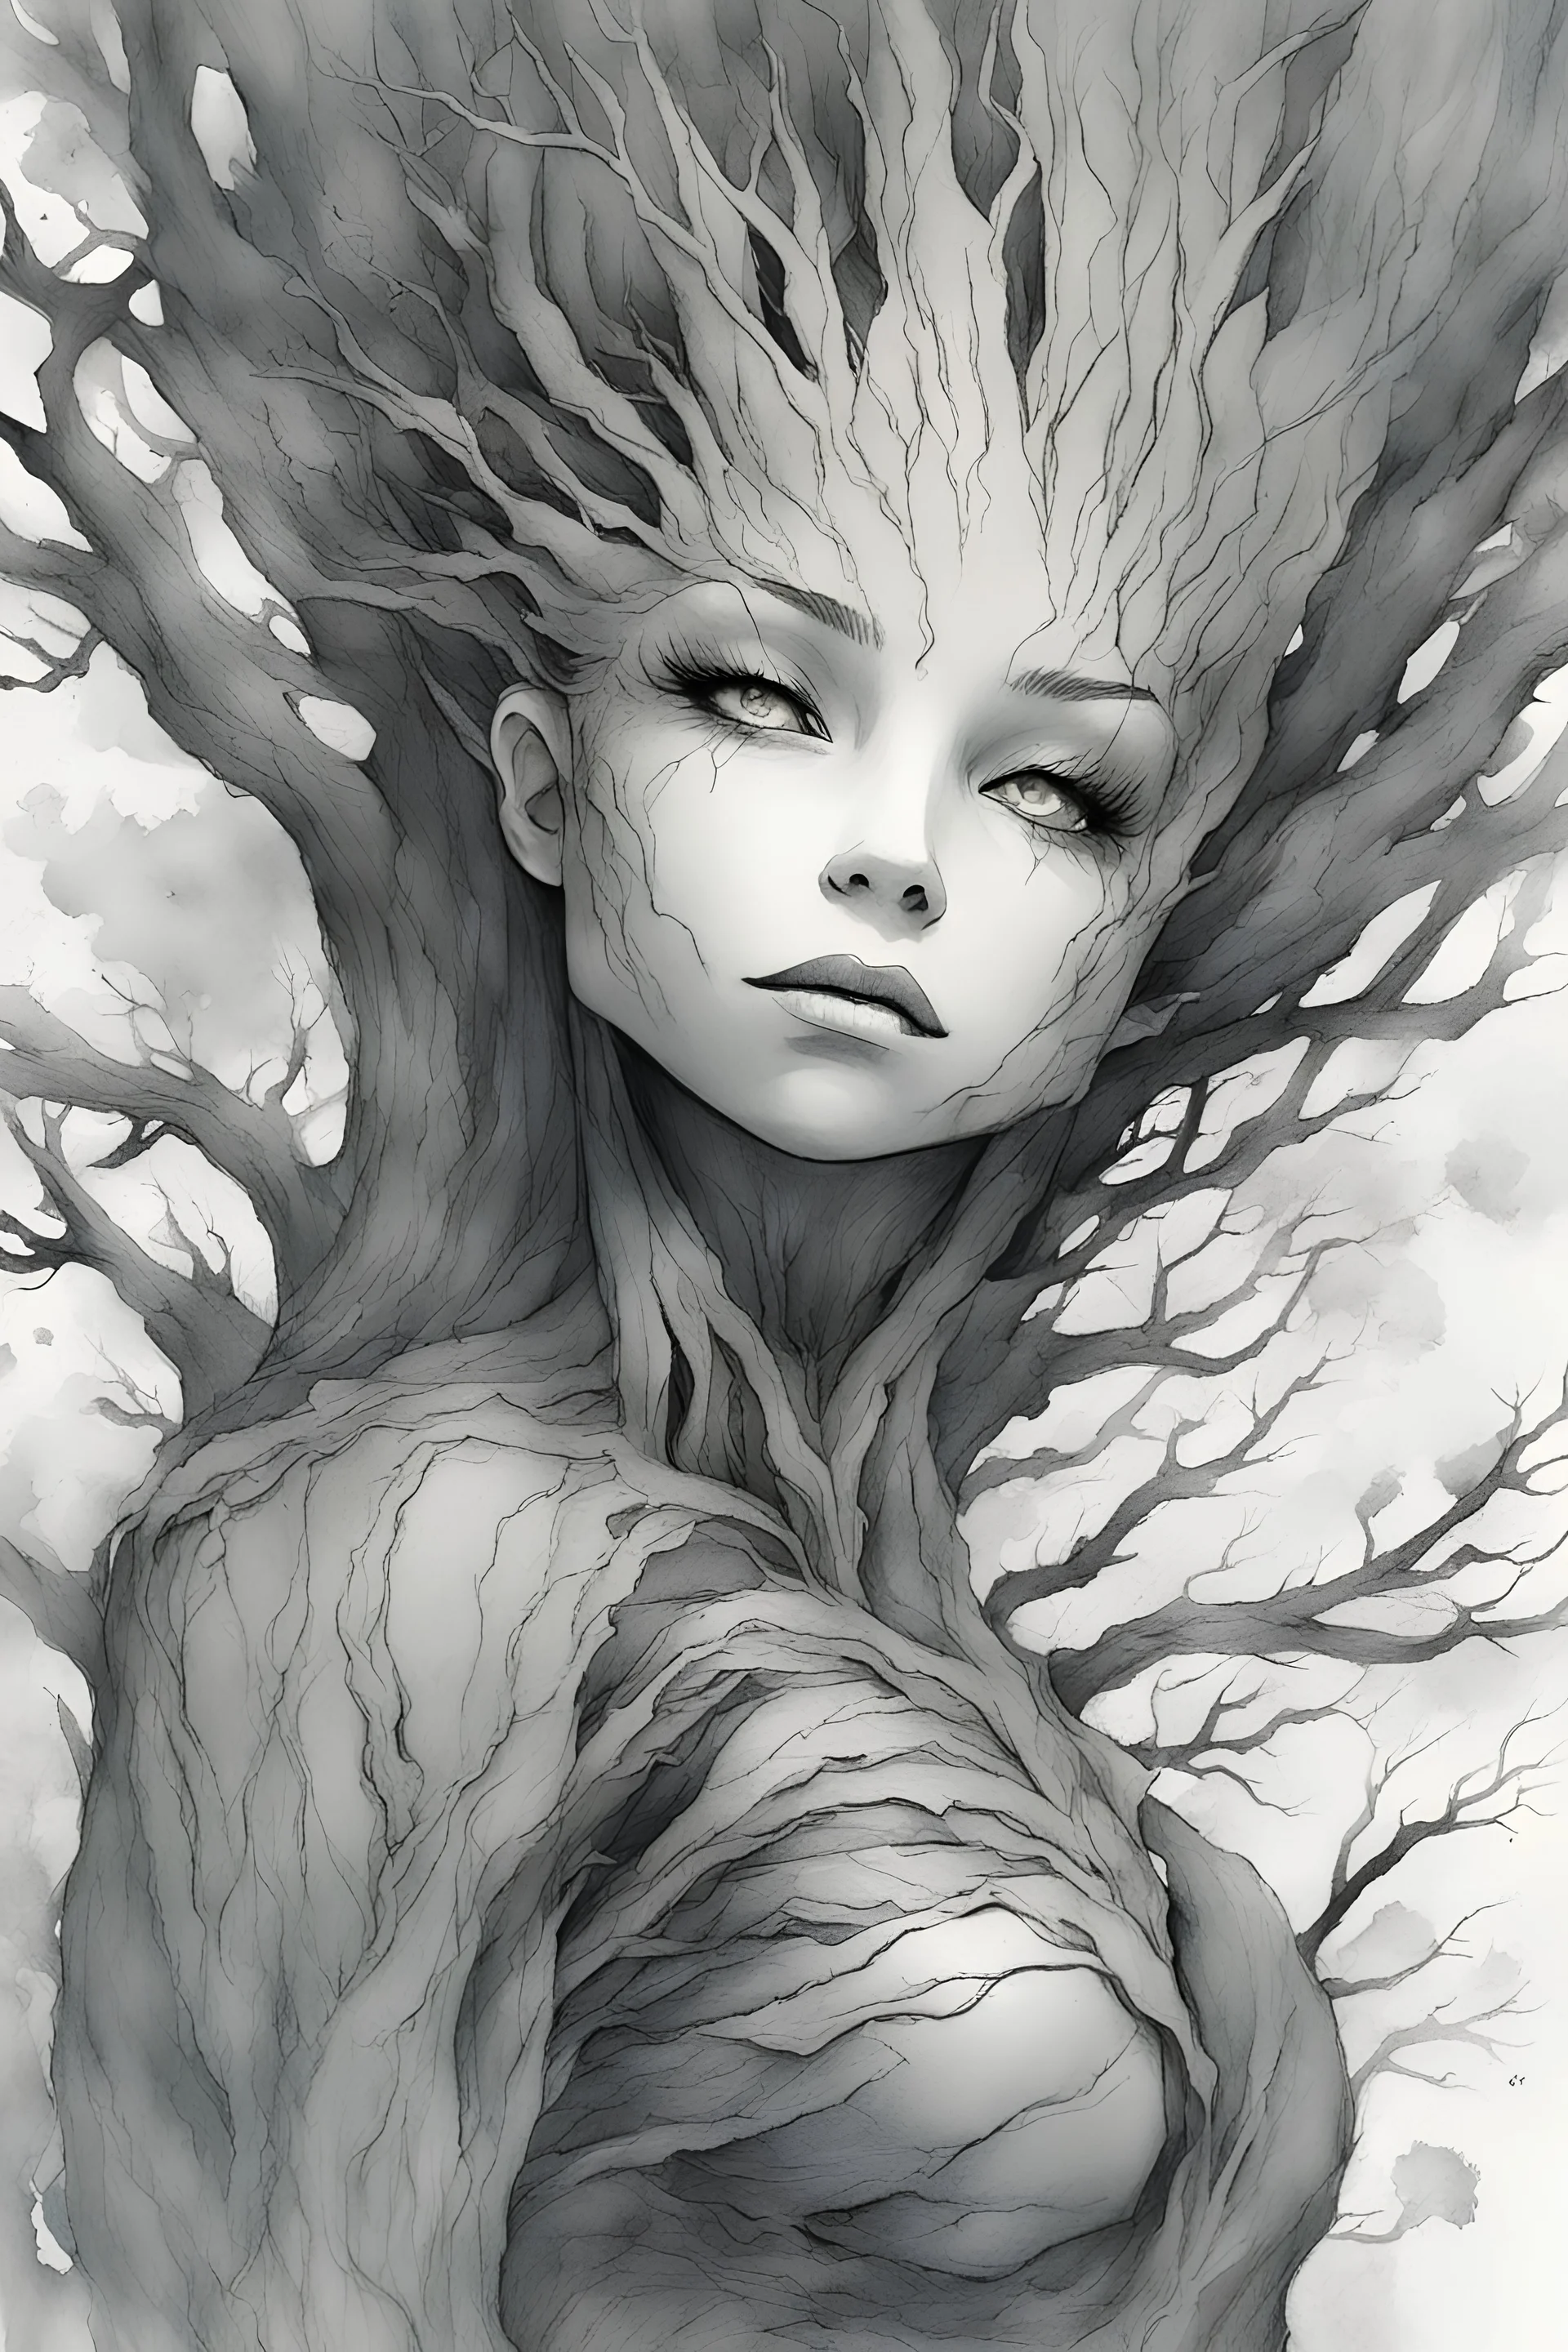 tree woman, groot, female, flowers for hair, glowing eyes, fissures in their flesh, from which faint light shines, create a warm glow, created in inkwash and watercolor, art style of Olivier Coipel, HACCAN, illustrator 由良 Yura, 山田章博 Yamada Akihiro, 四々九 Yoshiku, GANMO＃